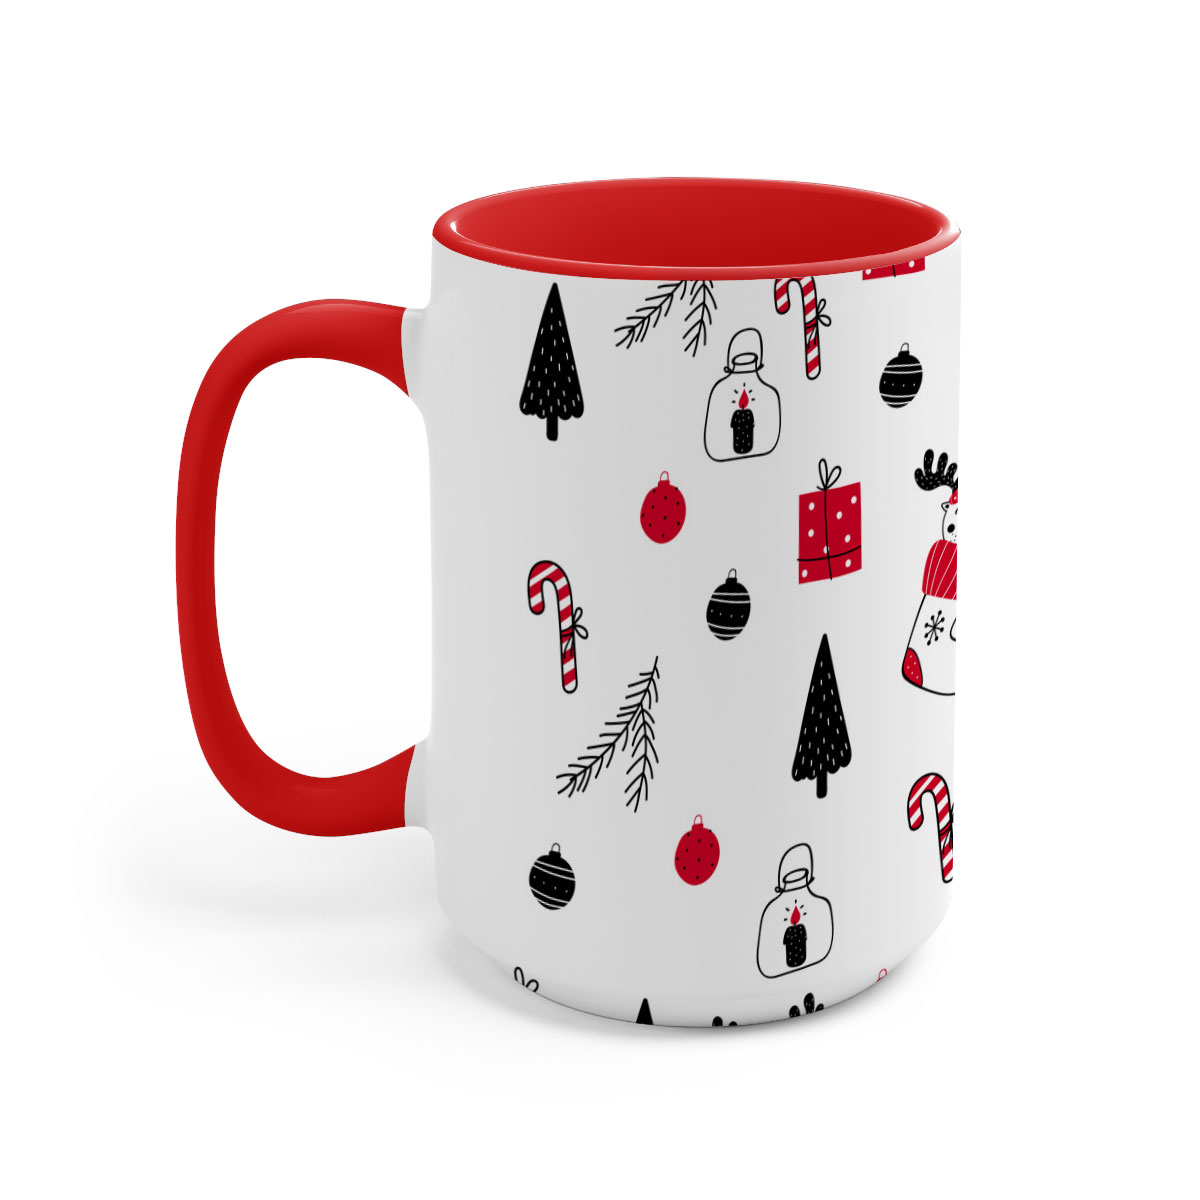 Reindeer Clipart In Hand Drawn Red Socks, Christmas Balls, Candy Canes, And Christmas Gifts Seamless White Pattern Two-Tone Coffee Mugs